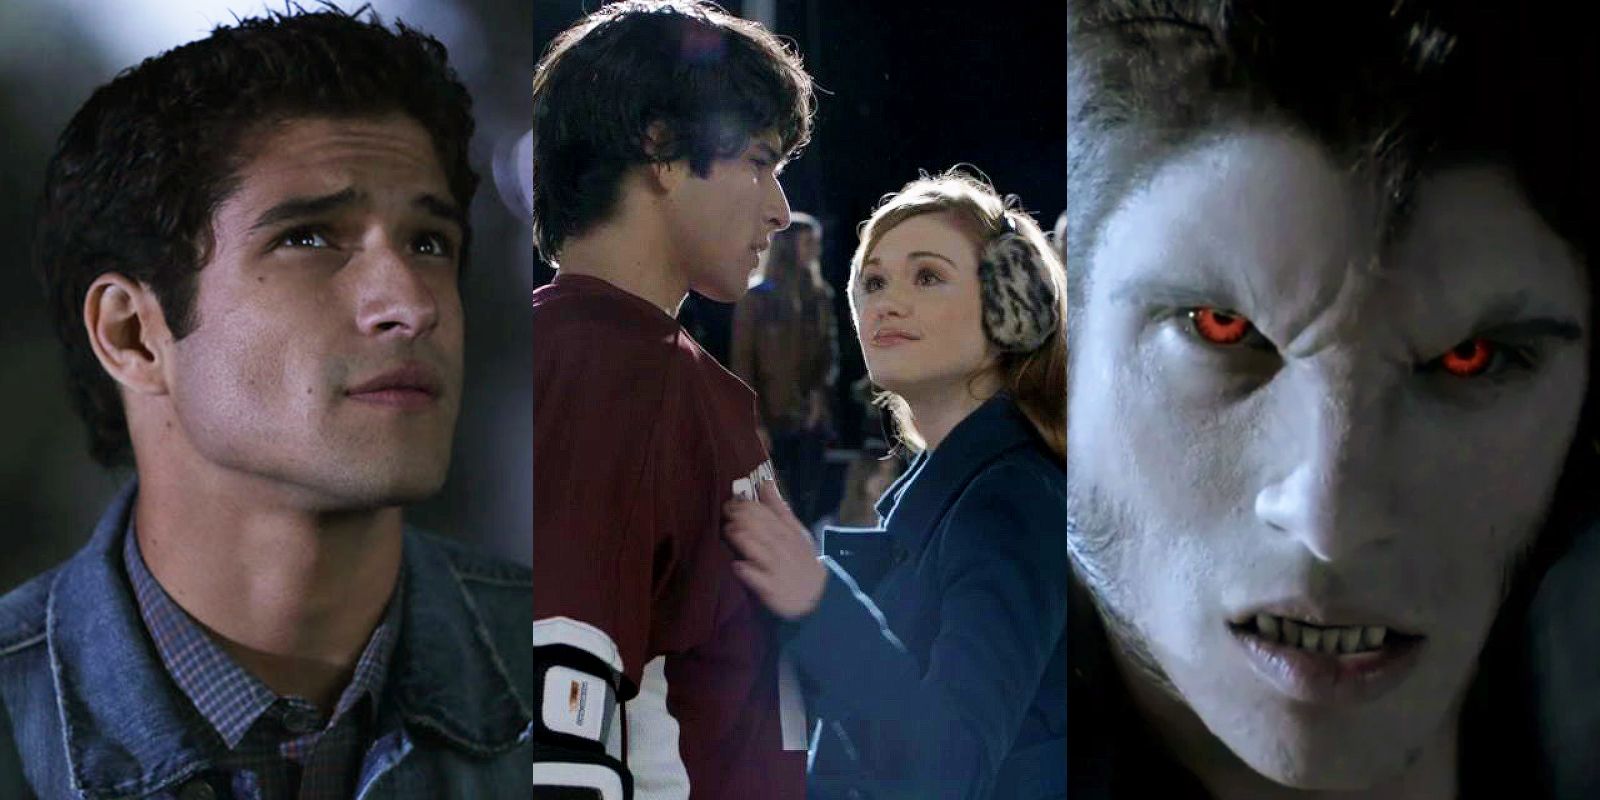 Split image: Scott McCall acting like a typical teenager.